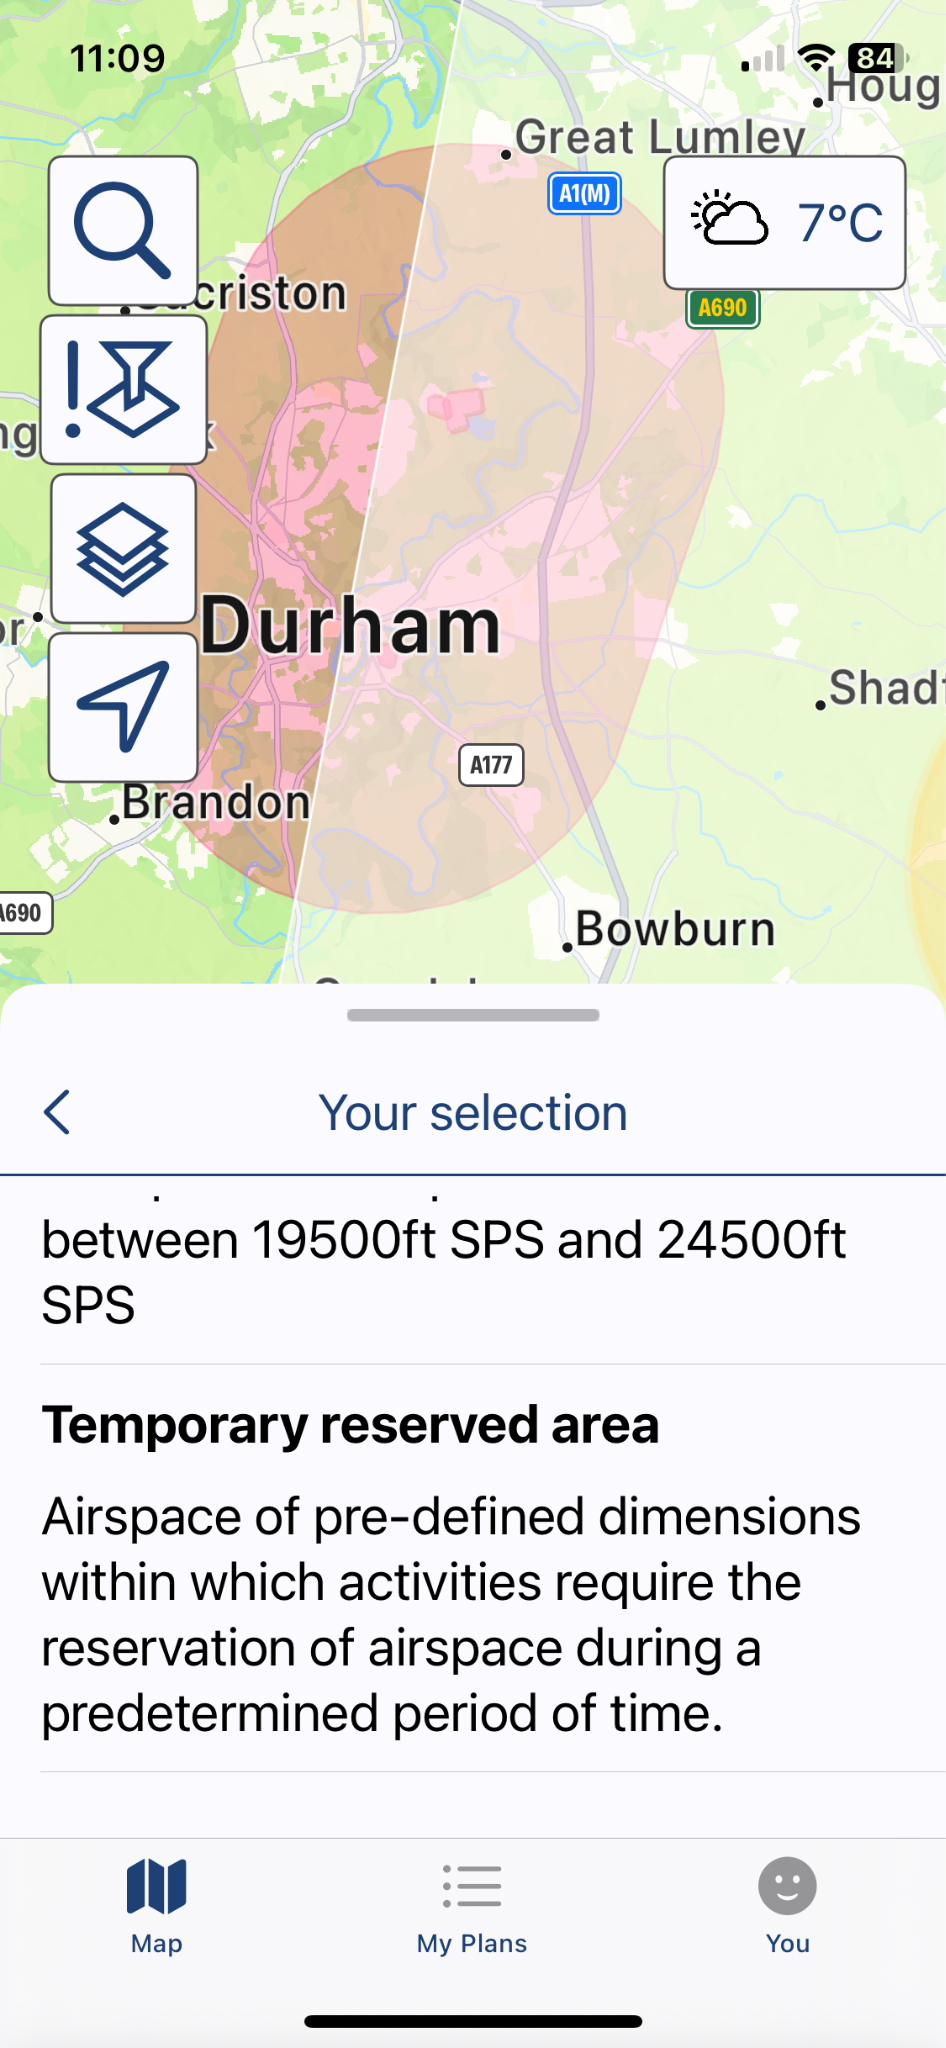 A drone app detailing restricted zones in the UK